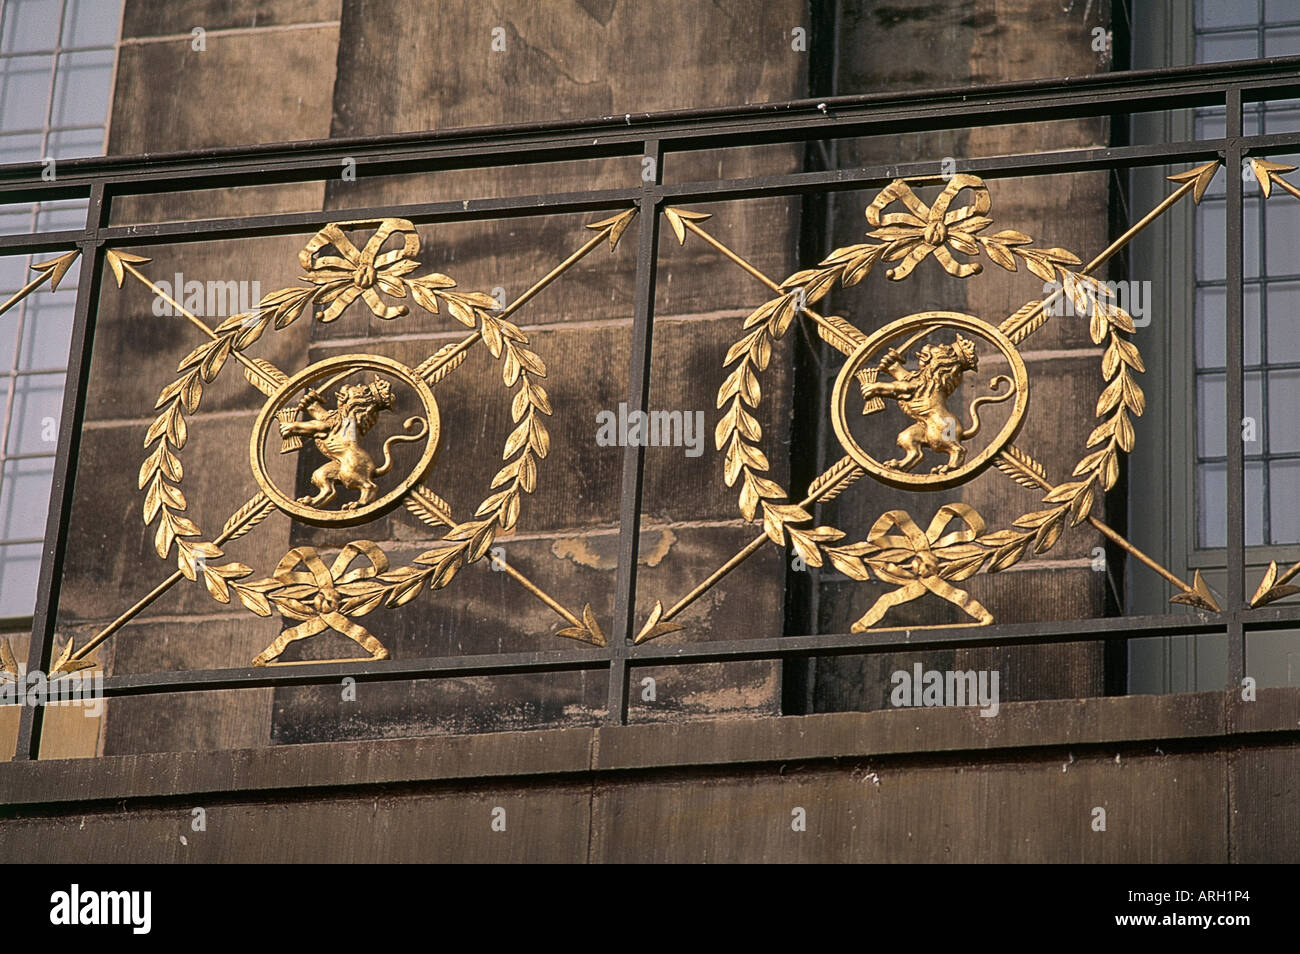 A detail of the gilded crests set in a wreath with an arrow design which adorn the railings of Amsterdam s 17th century Royal Palace Koninklijk Palace designed by Jacob van Campen and the City Hall until 1808 when Louis Bonaparte decided to take up residence Stock Photo